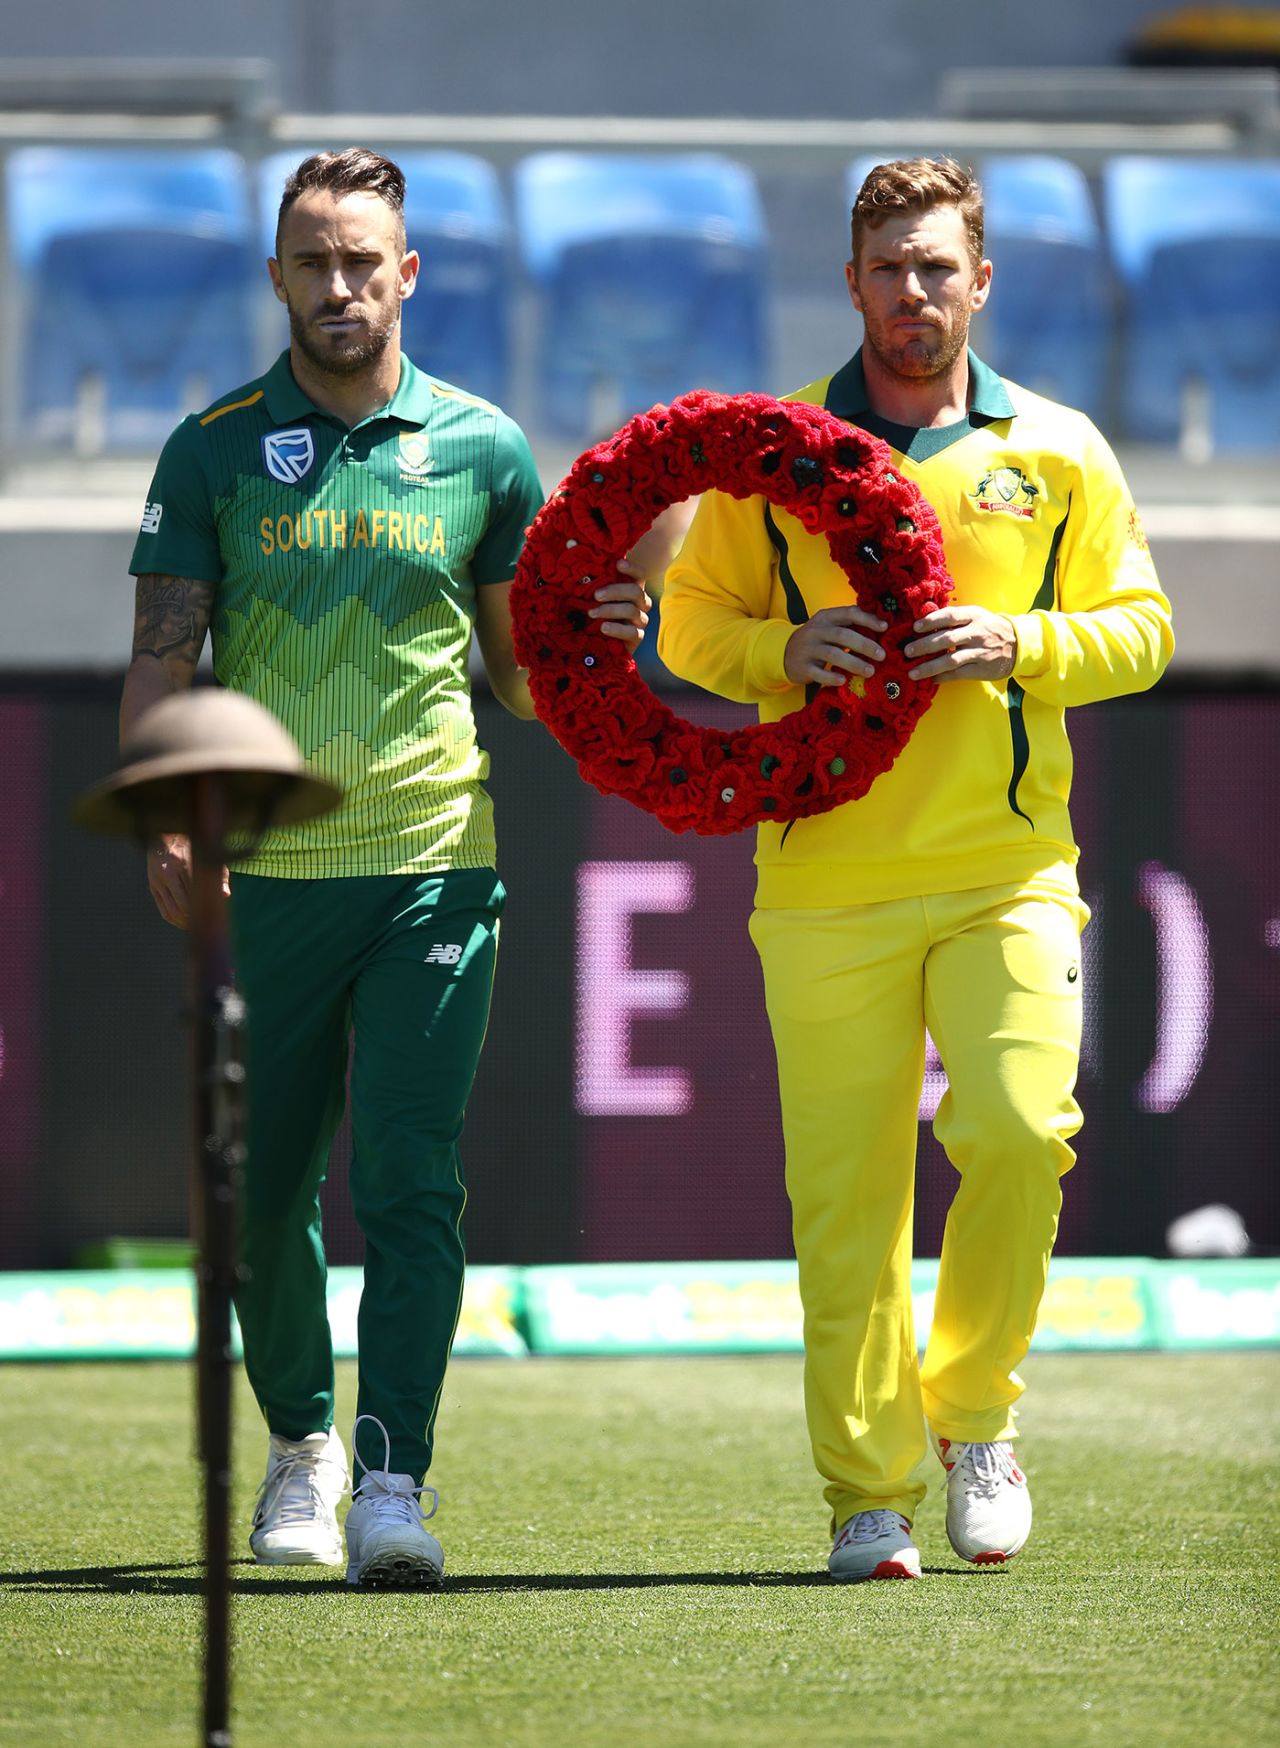 There was a ceremony to mark Armistice Day before the start of the third ODI, Australia v South Africa, 3rd ODI, Hobart, November 11, 2018